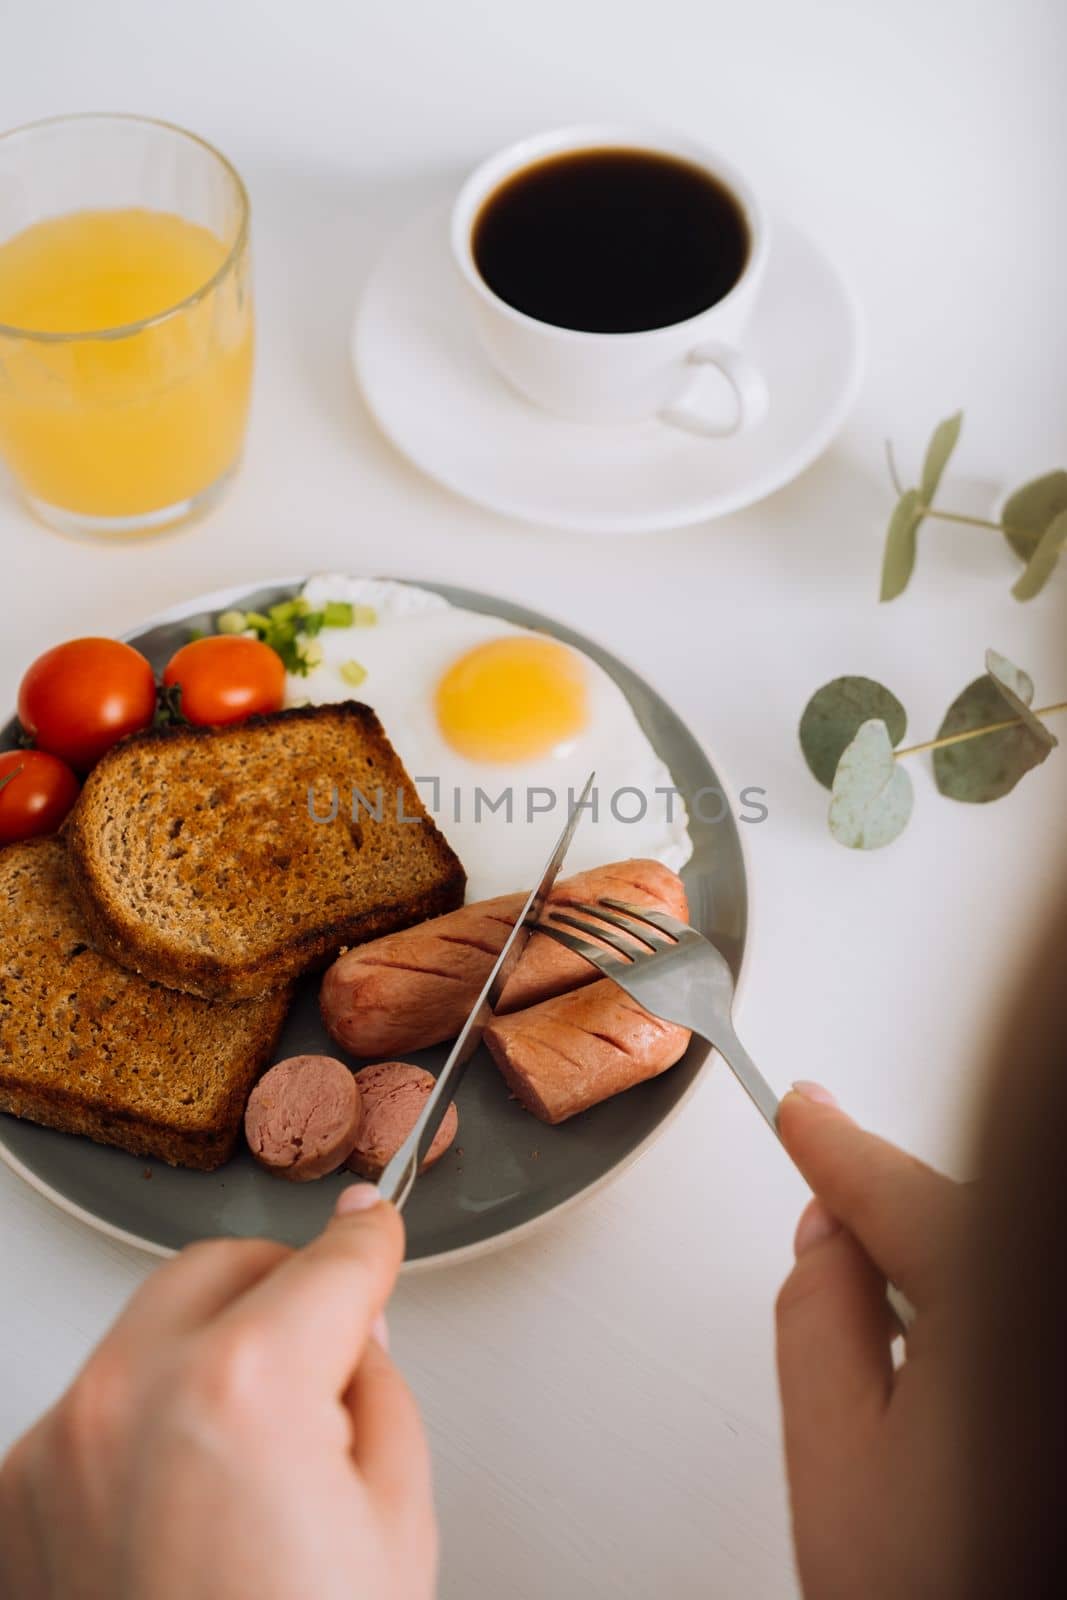 English breakfast with black coffee and orange juice, grilled sausage and whole wheat toast with fried egg and cherry tomatoes on a plate by Romvy